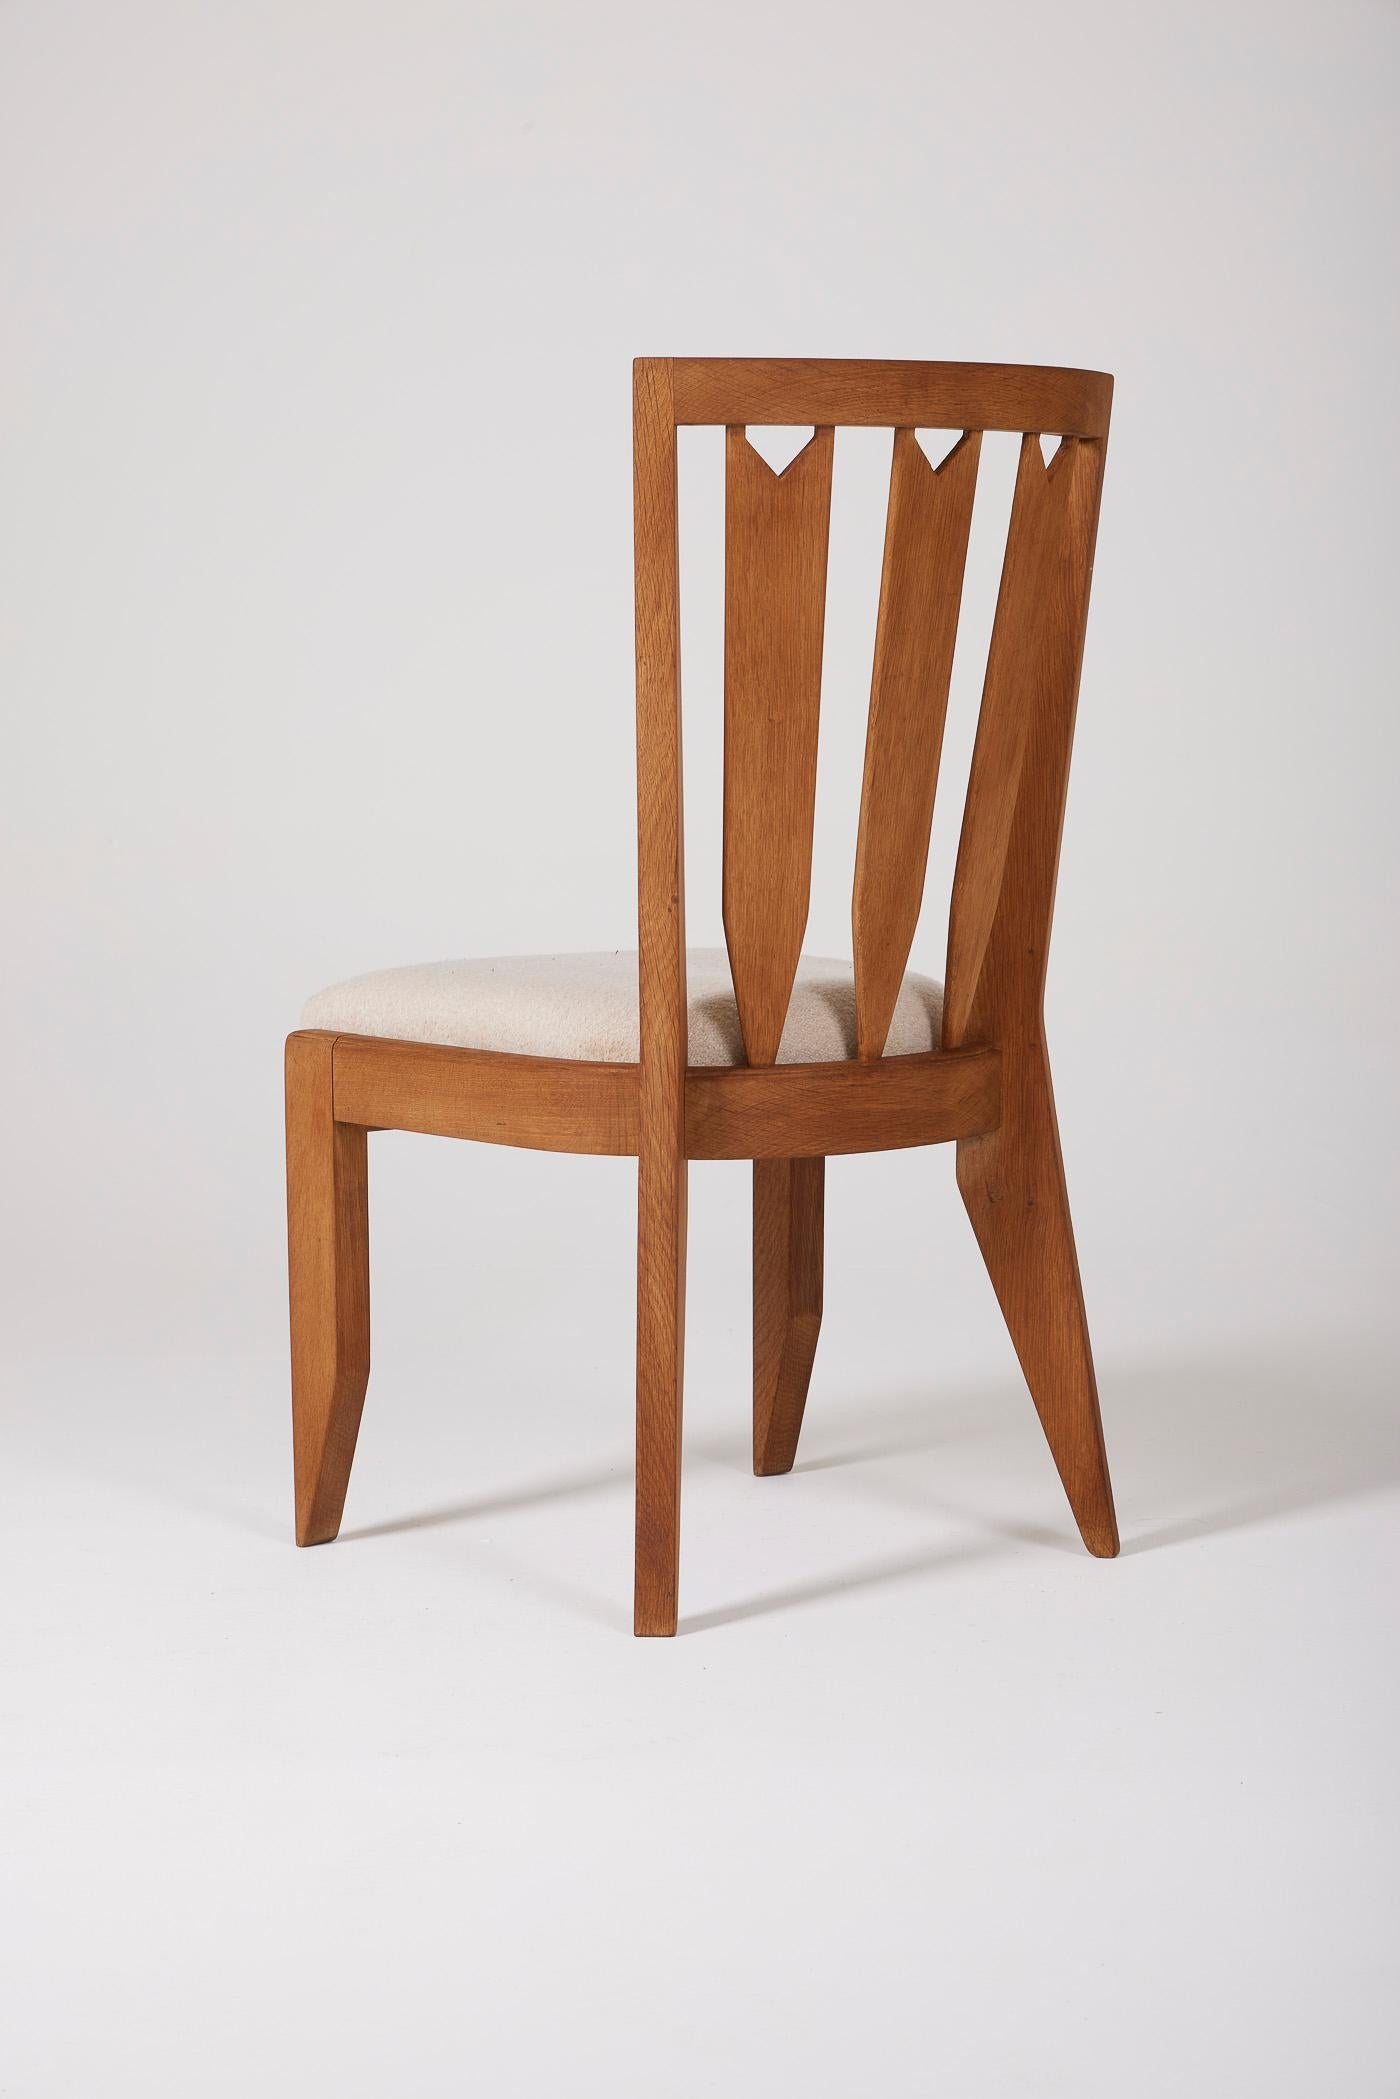 French Guillerme & Chambron chair